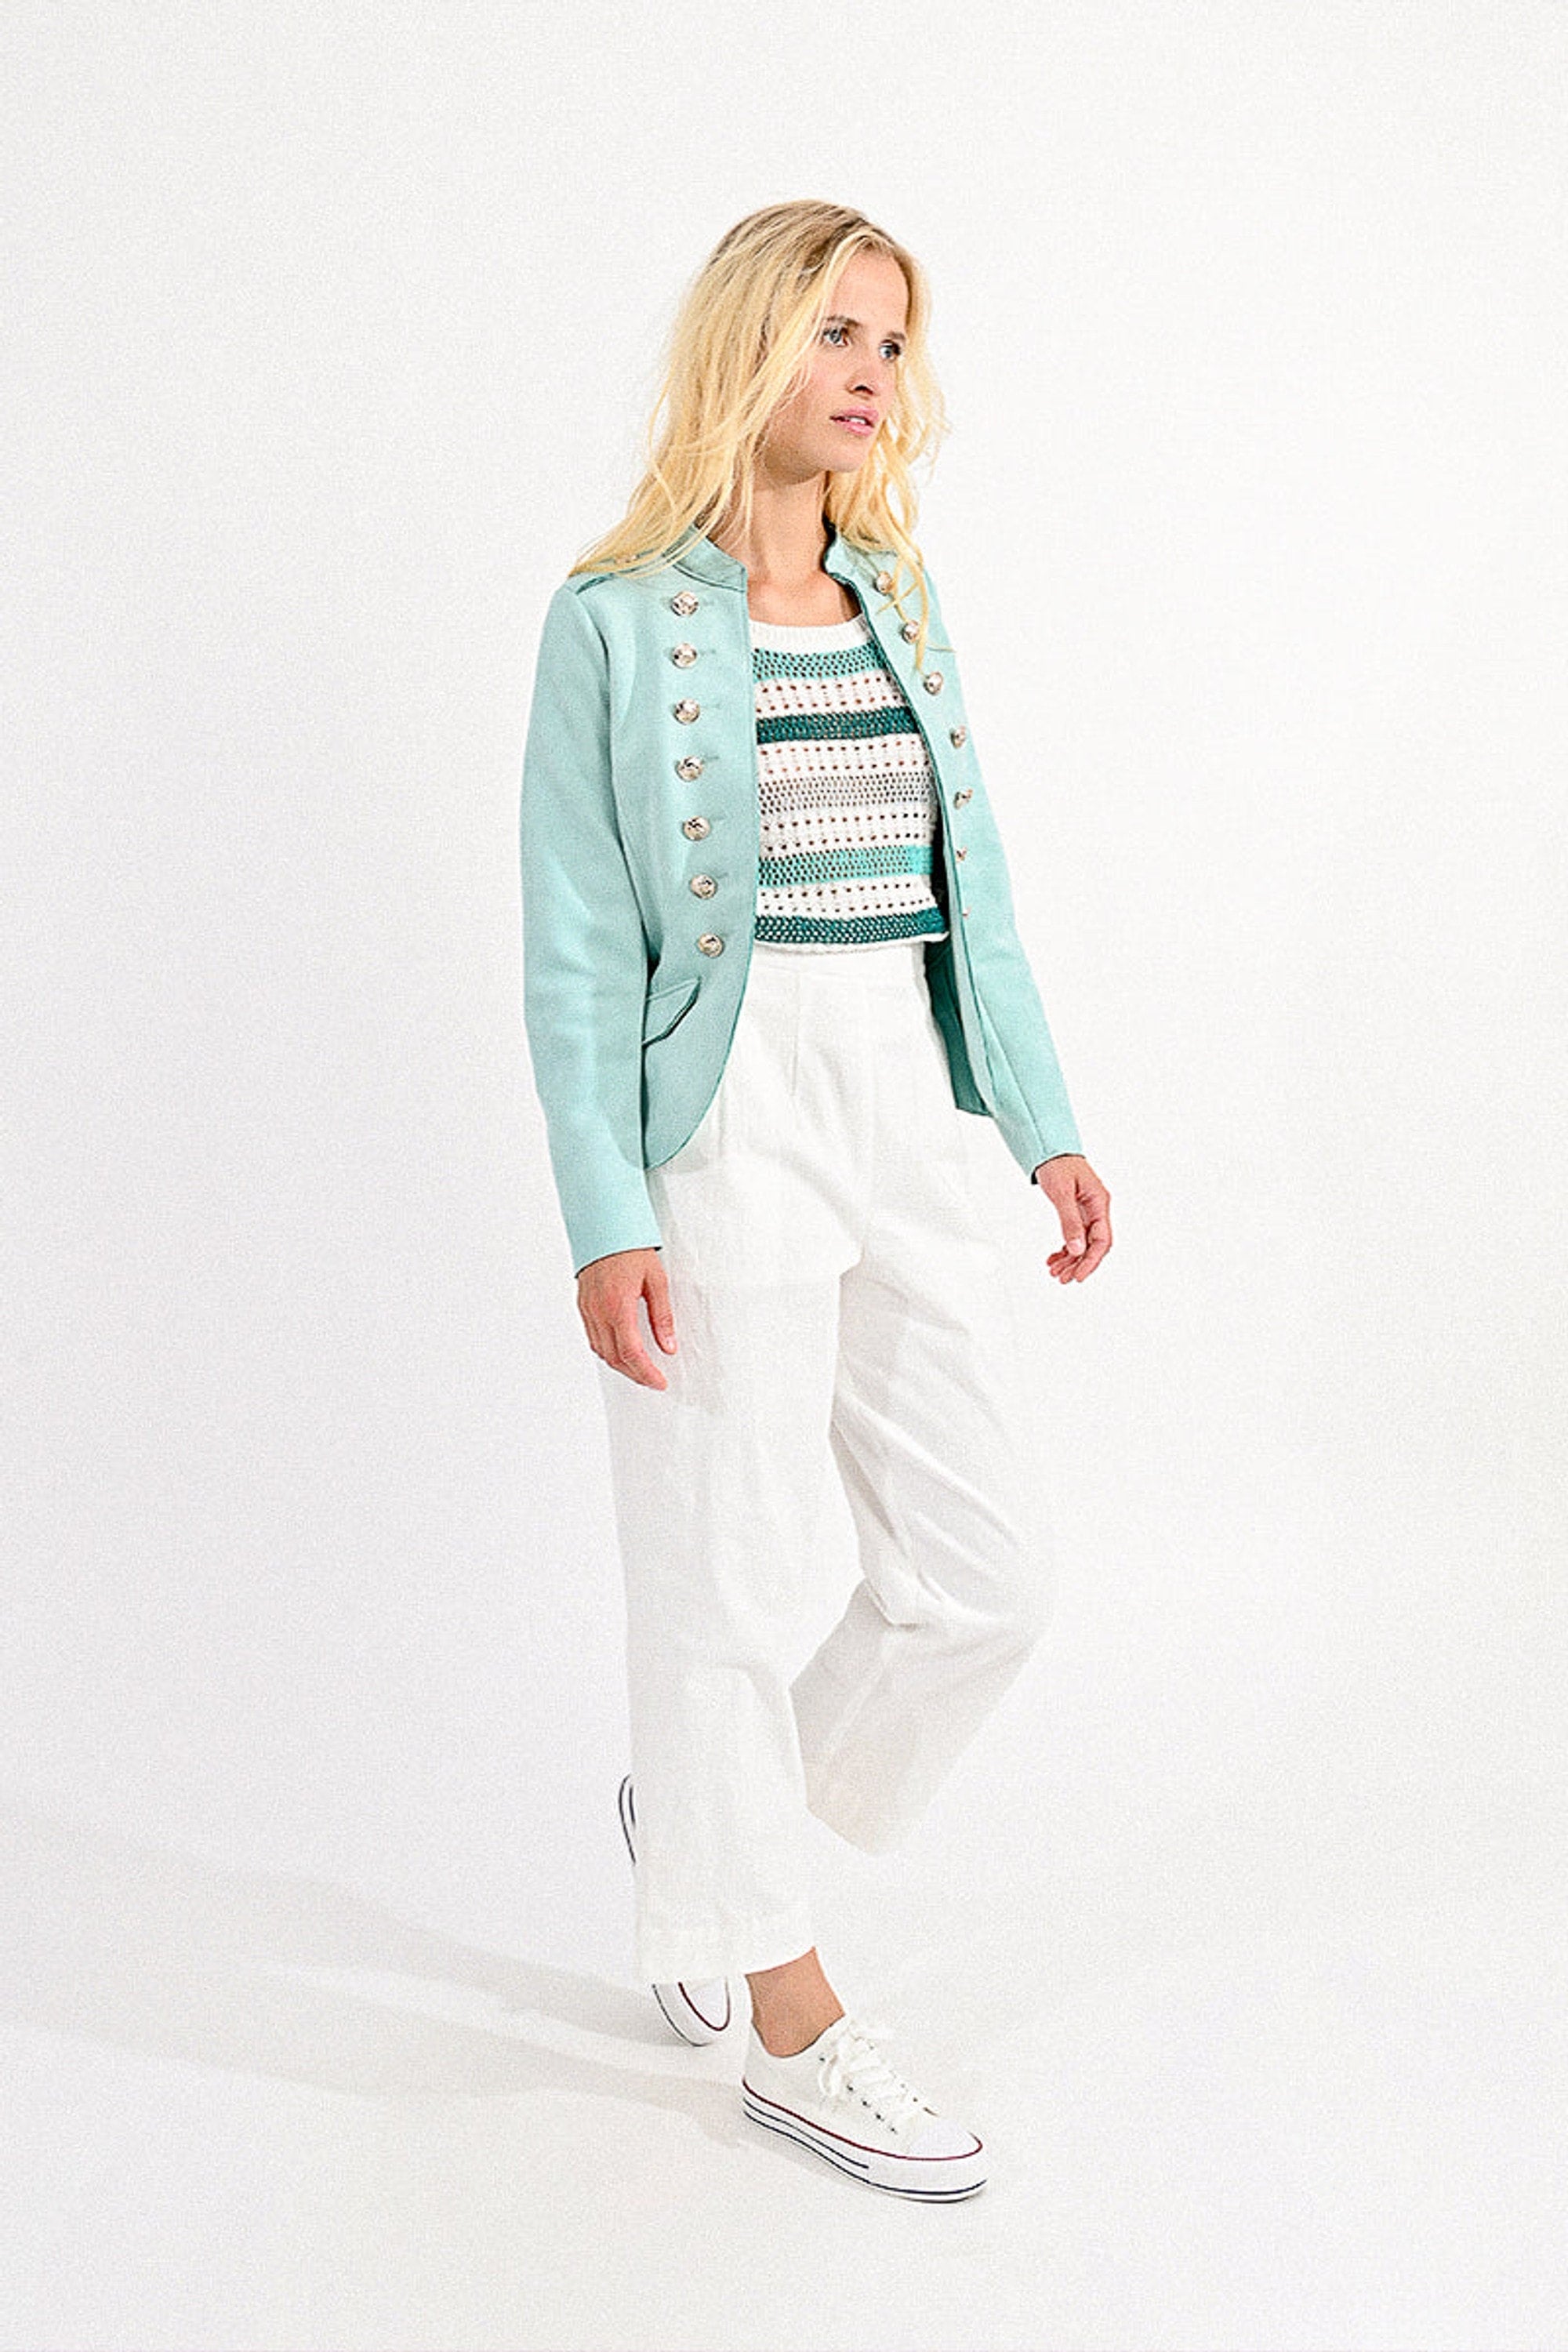 Molly Bracken Jacket in Turquoise - clever alice